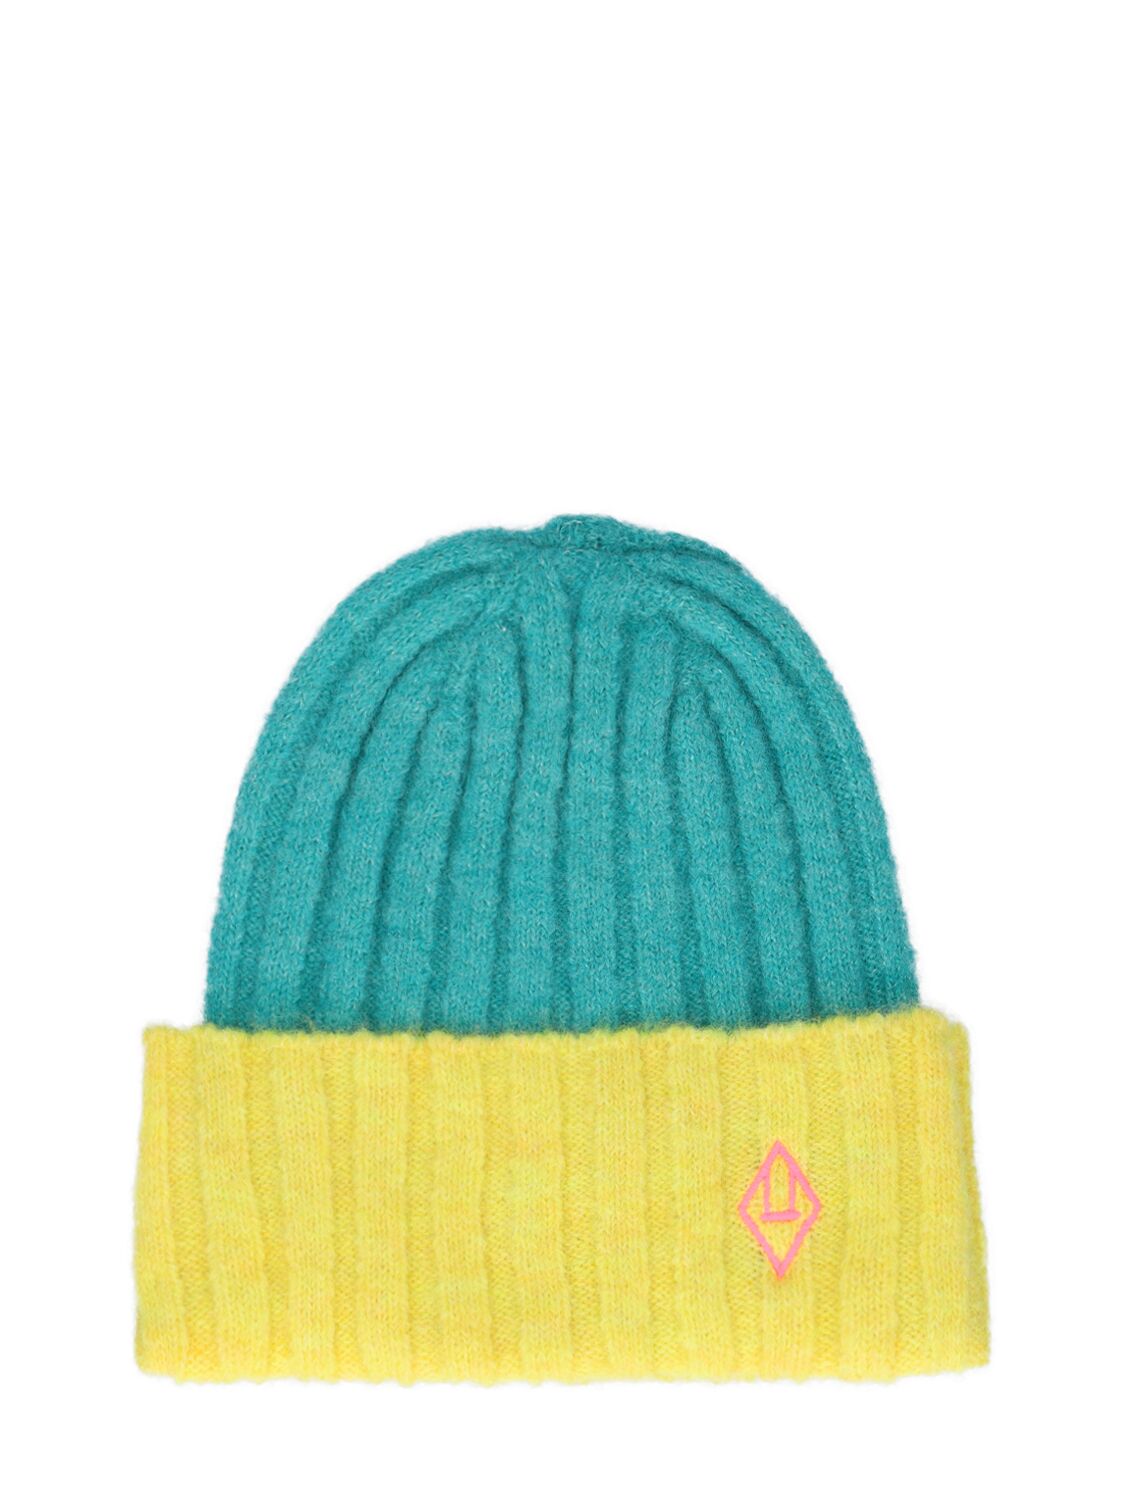 The Animals Observatory Kids' Wool Blend Knit Beanie In Multicolor